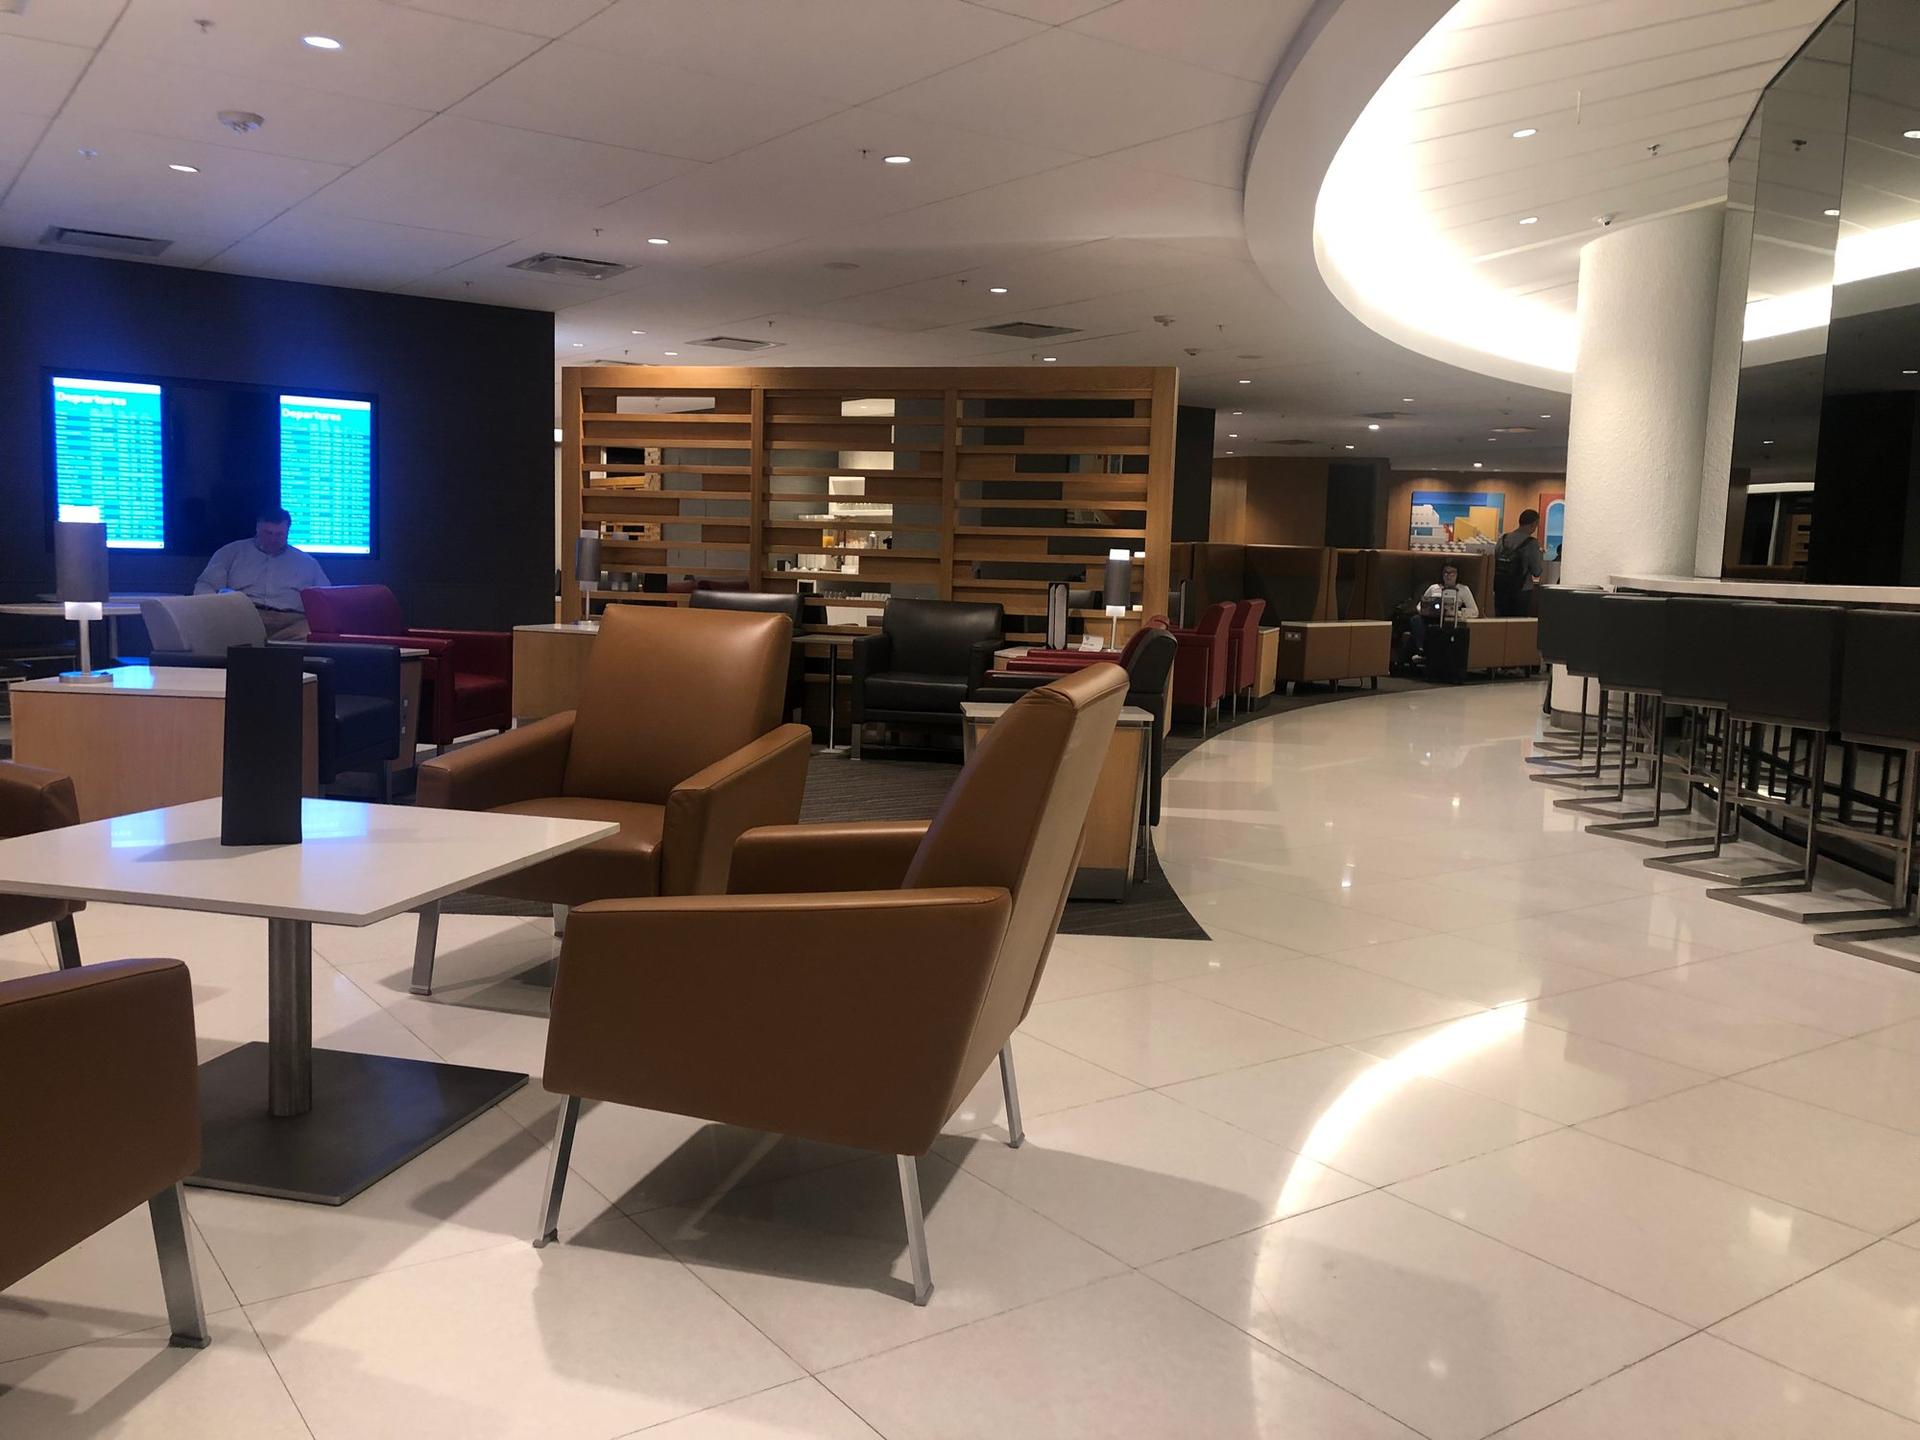 American Airlines Admirals Club (Gate D15) image 24 of 25